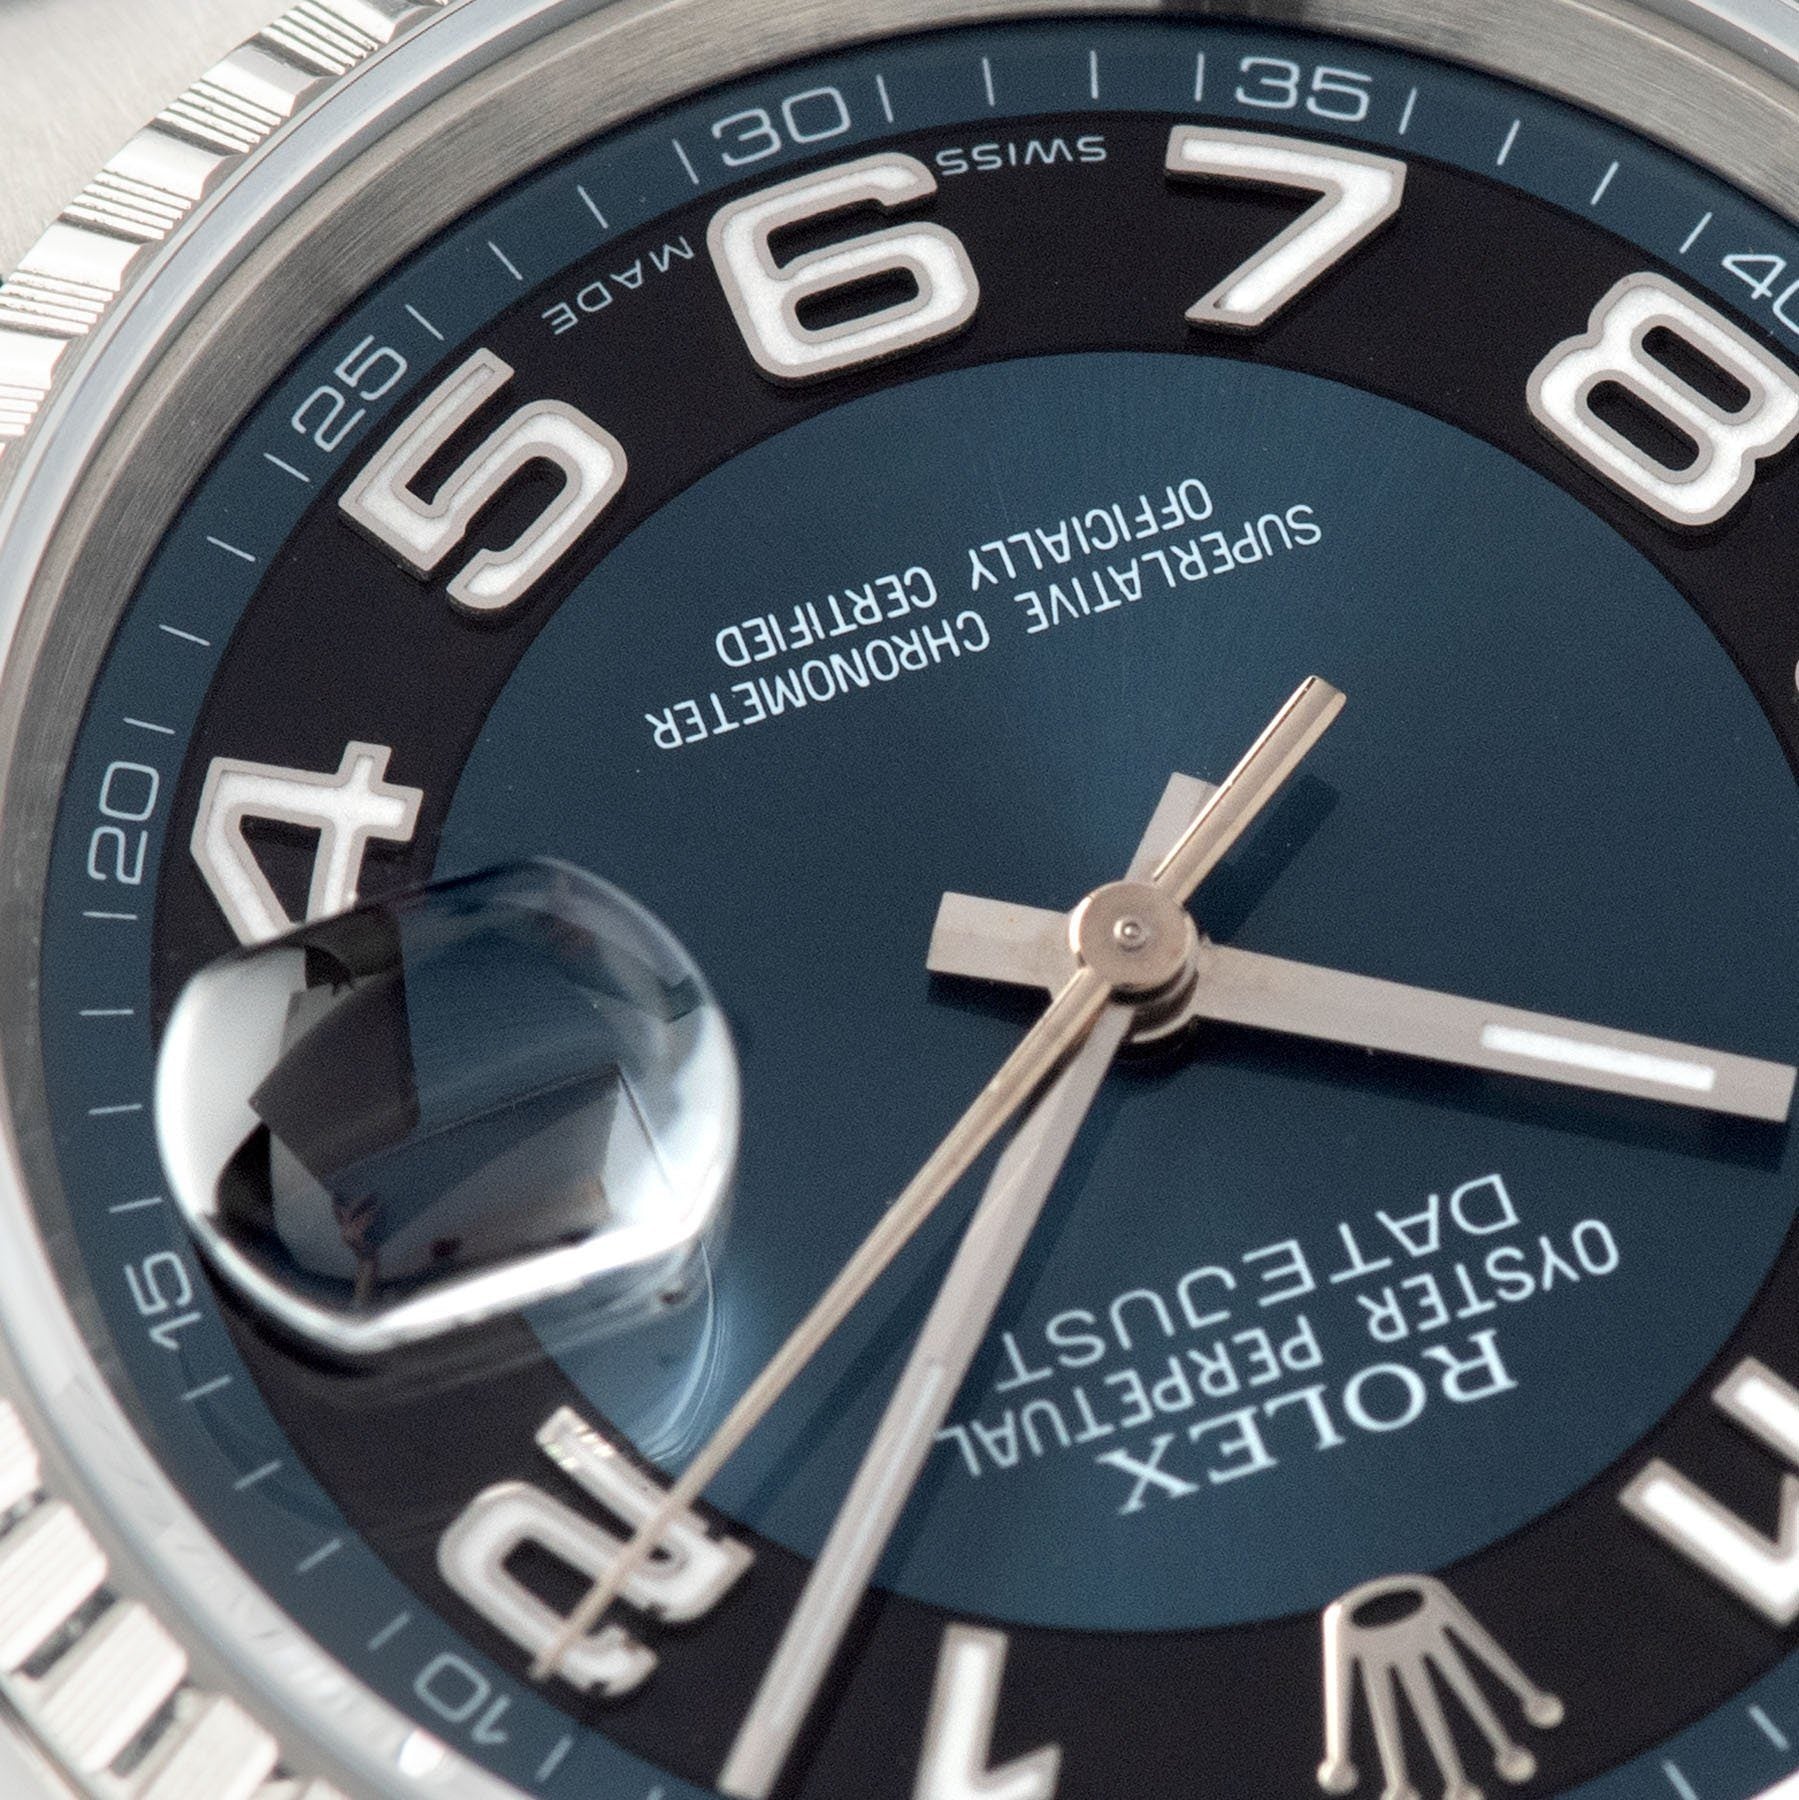 Rolex Datejust Blue and Black Tuxedo Dial Reference 16220